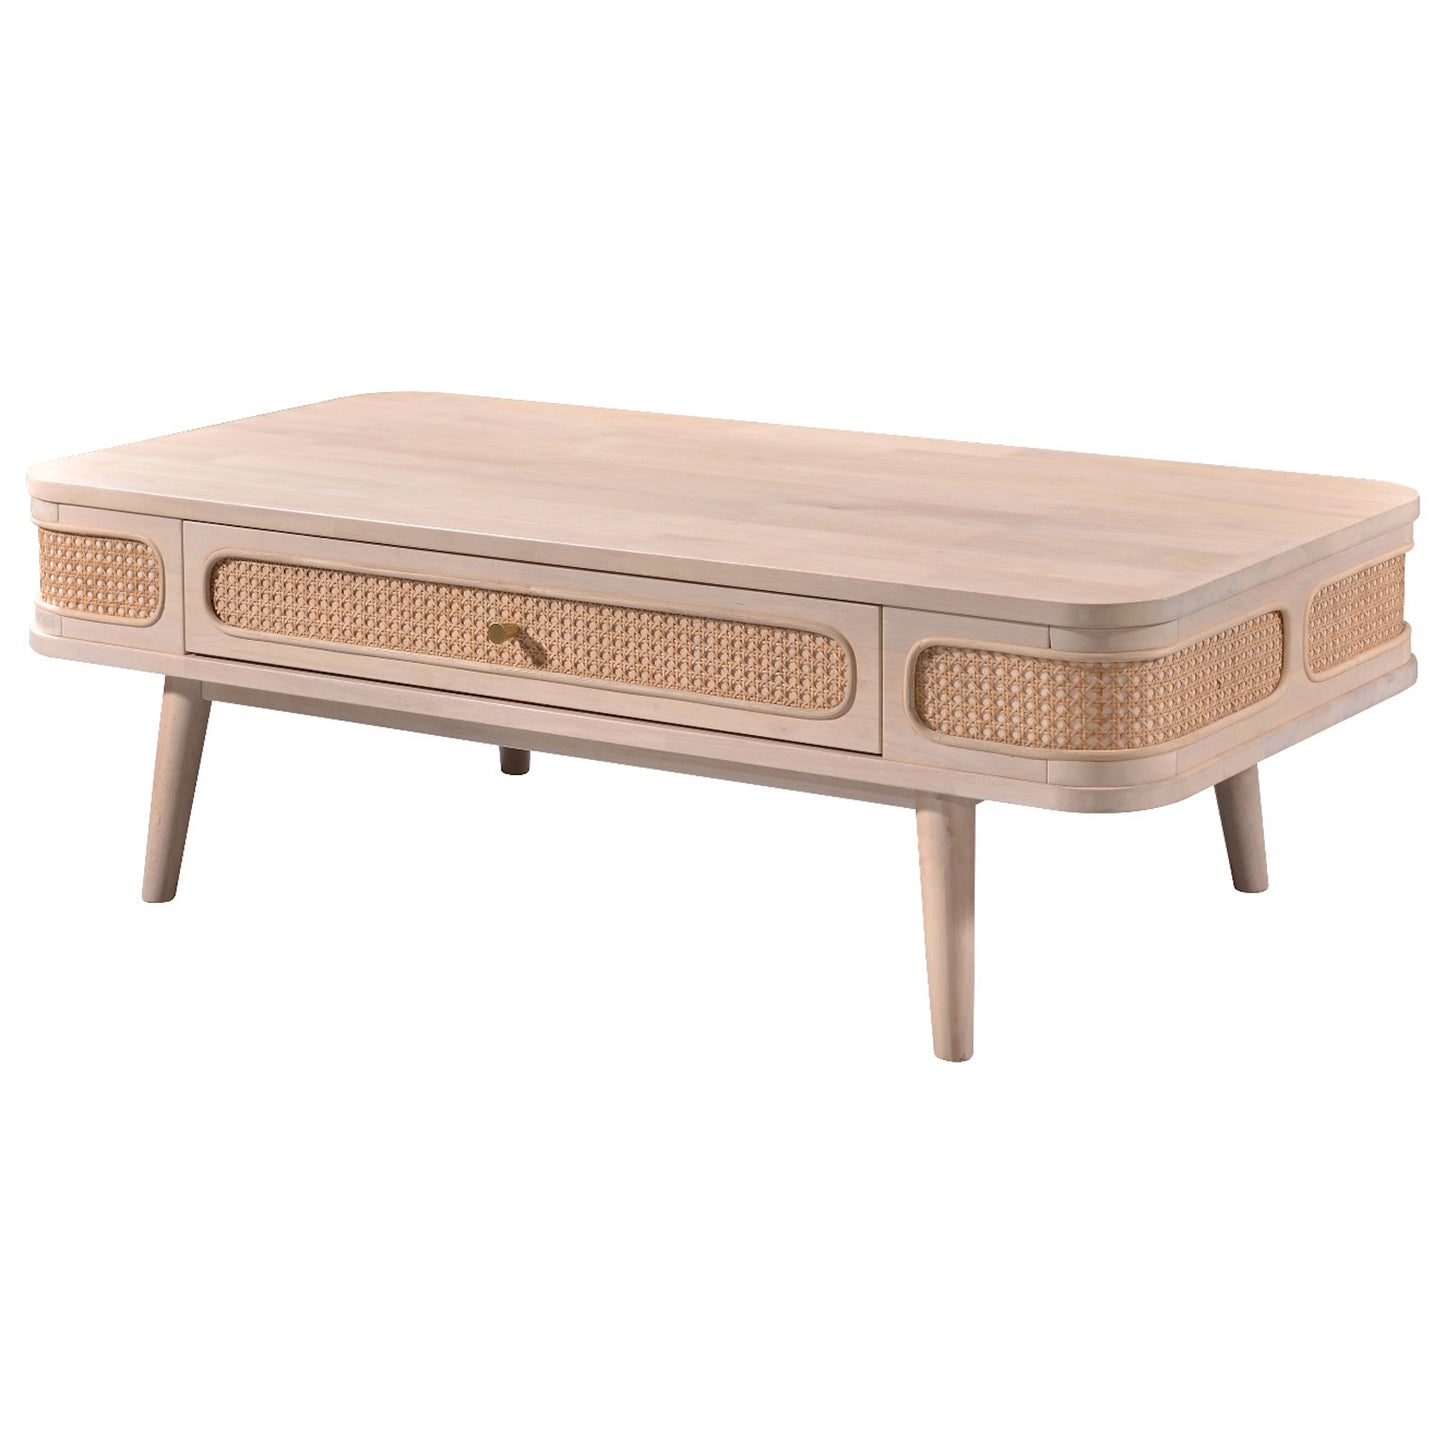 Criterion Jurien Coffee Table 1200mm Semi-Assembled, Solid Rubber Wood Construction Rattan and White Chocolate